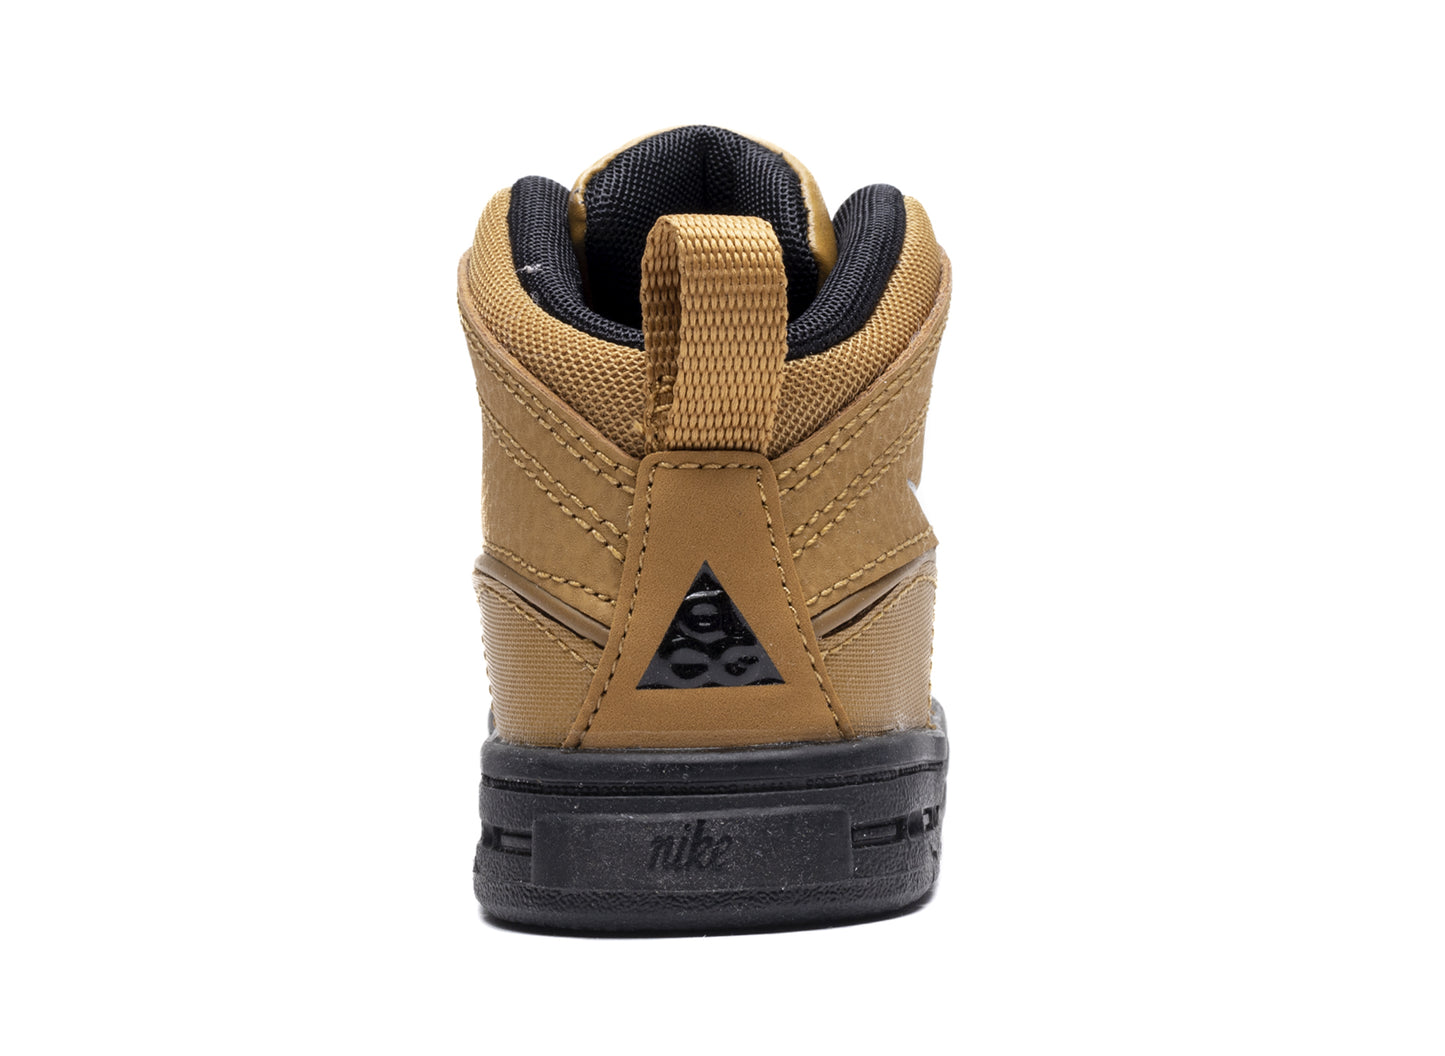 TD NIke Toddler Woodside 2 High ACG Boots